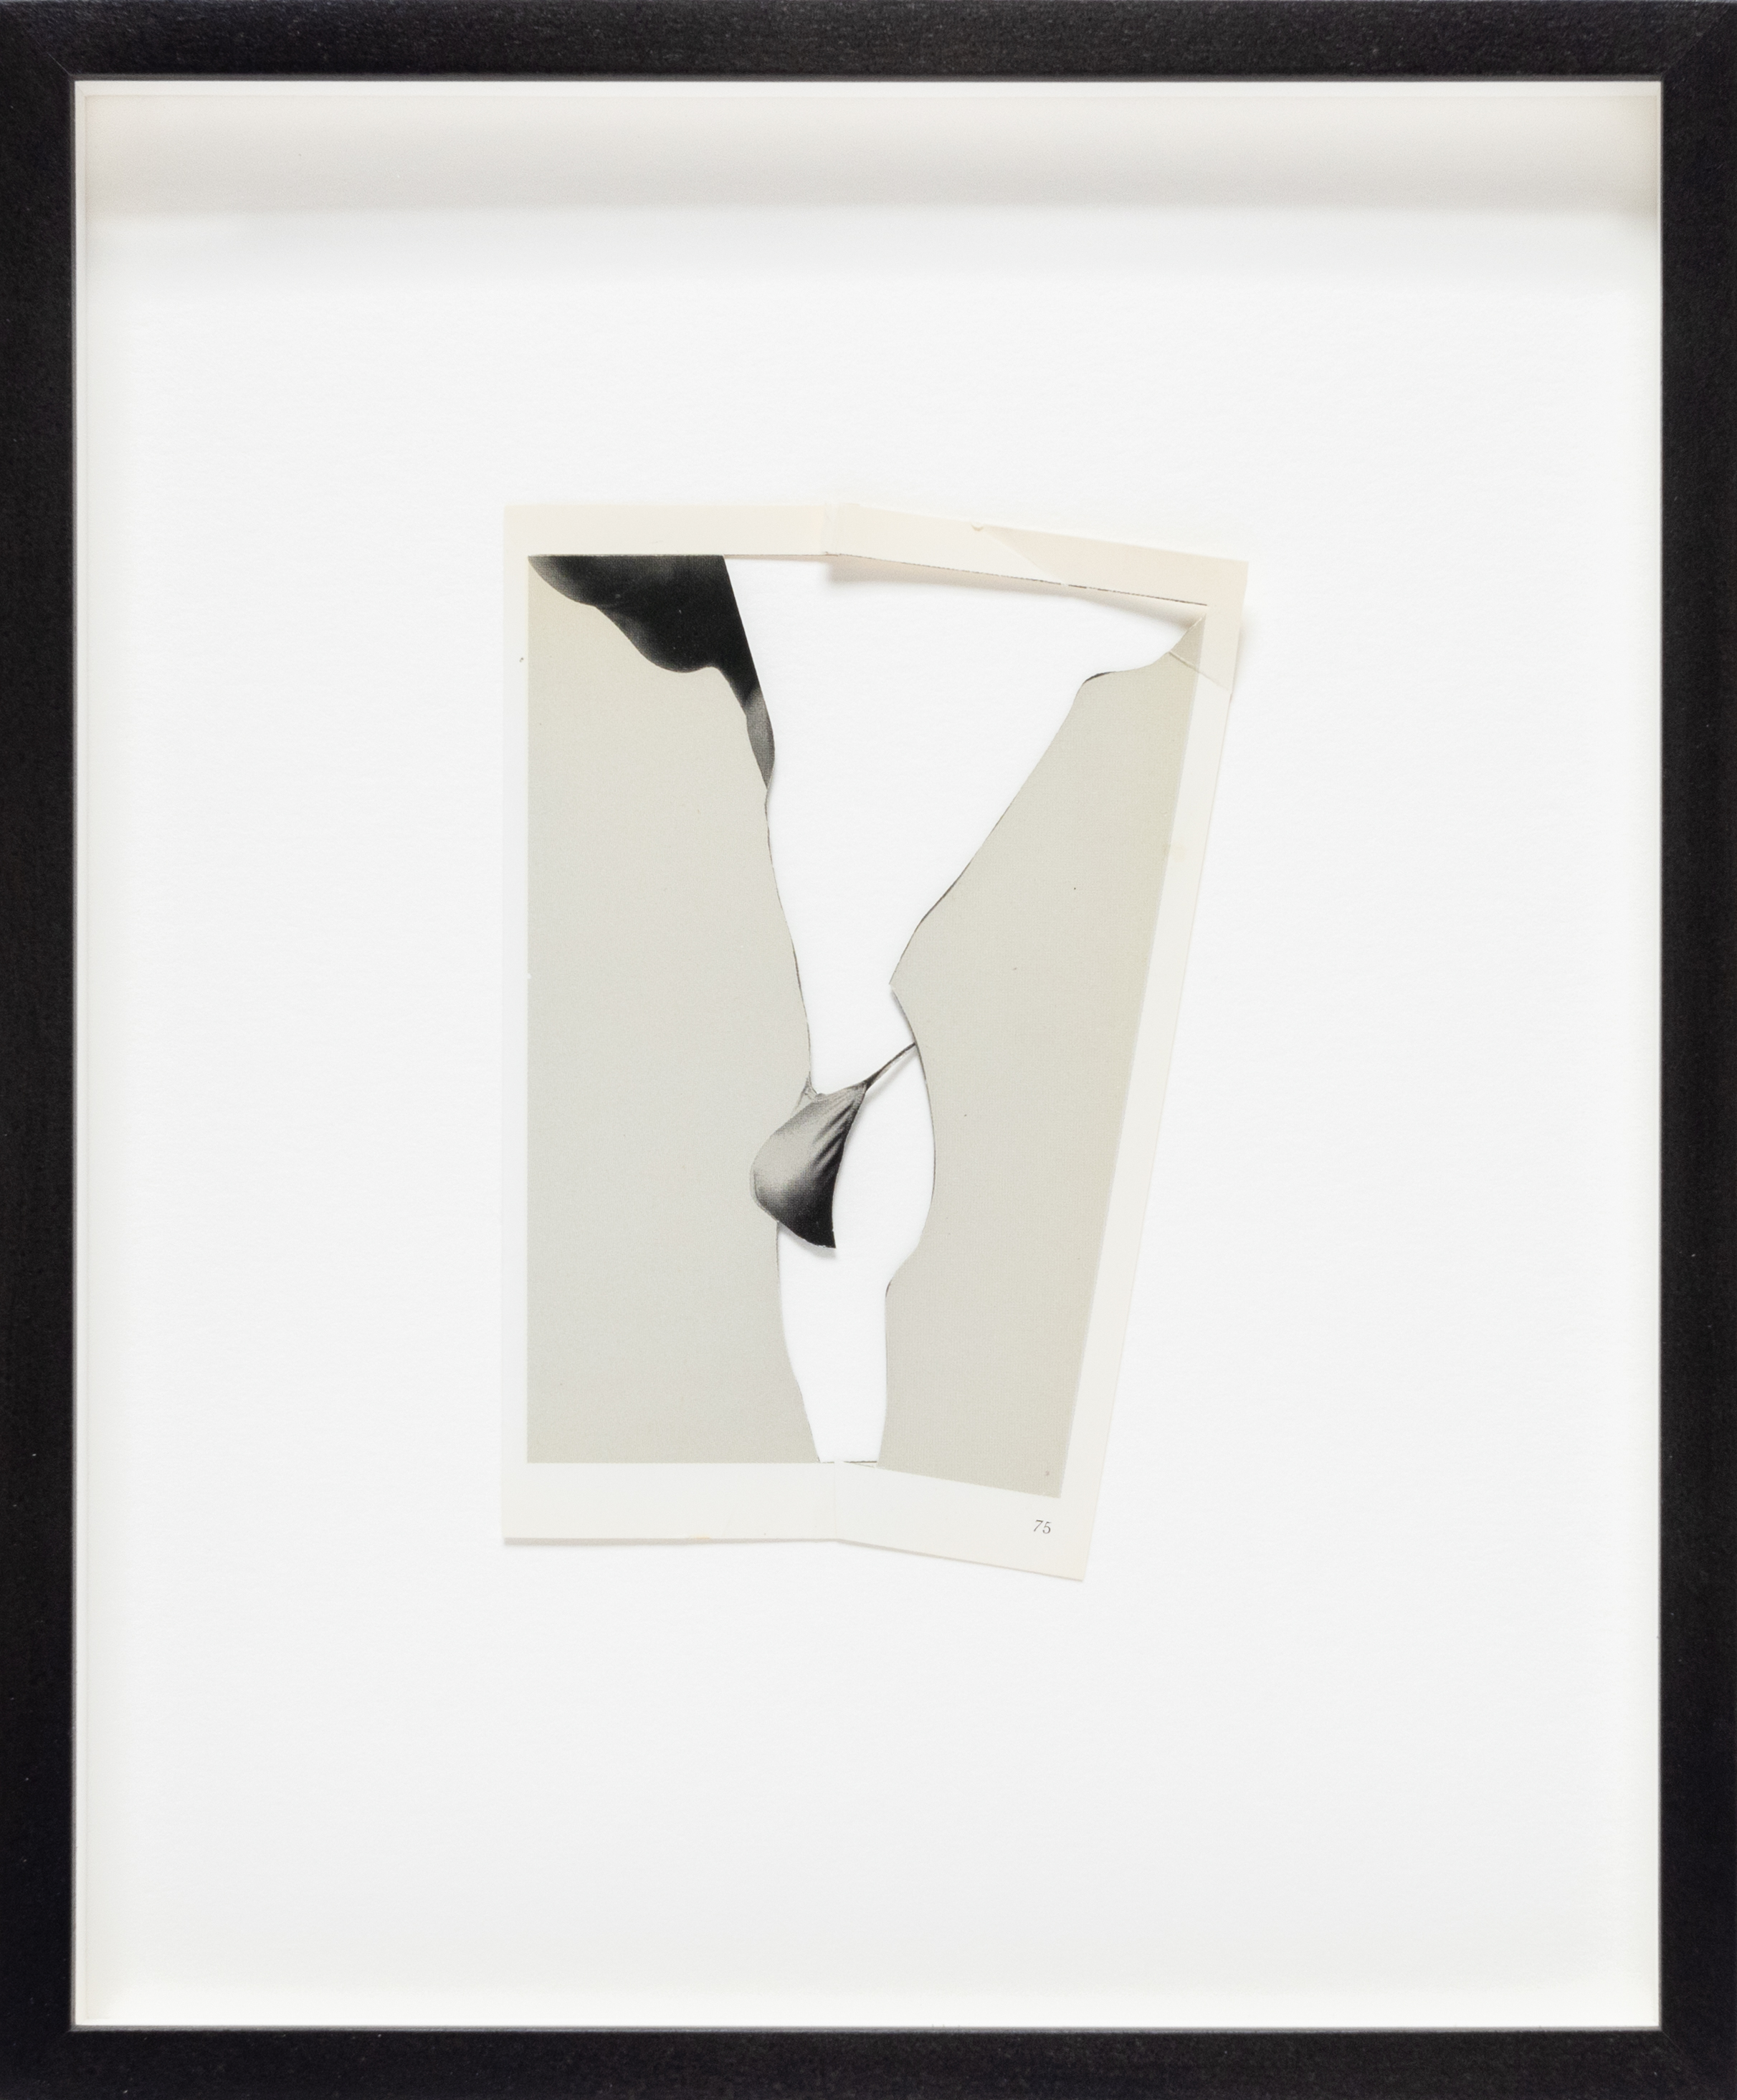 Color image of a black and white collage depicting a figure in a speedo using negative space framed in black